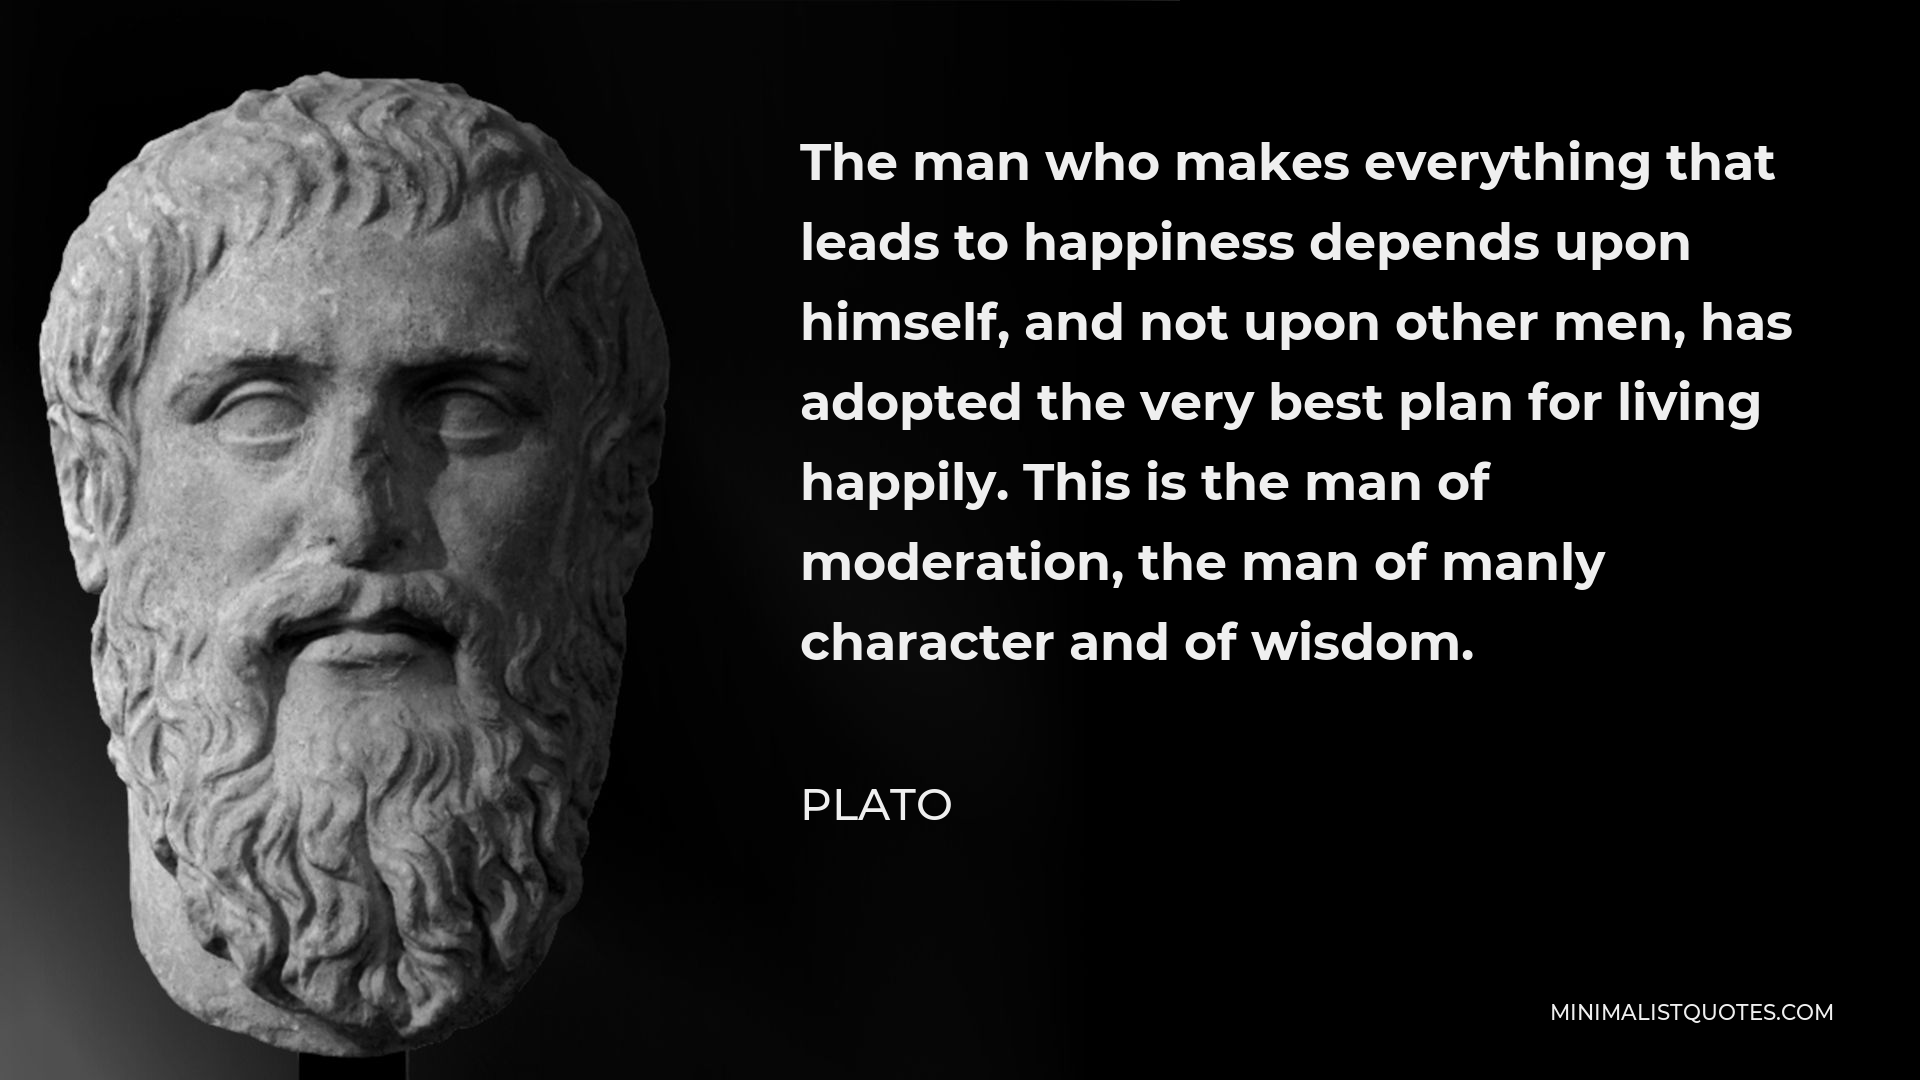 Plato Quote - The man who makes everything that leads to happiness depends upon himself, and not upon other men, has adopted the very best plan for living happily. This is the man of moderation, the man of manly character and of wisdom.